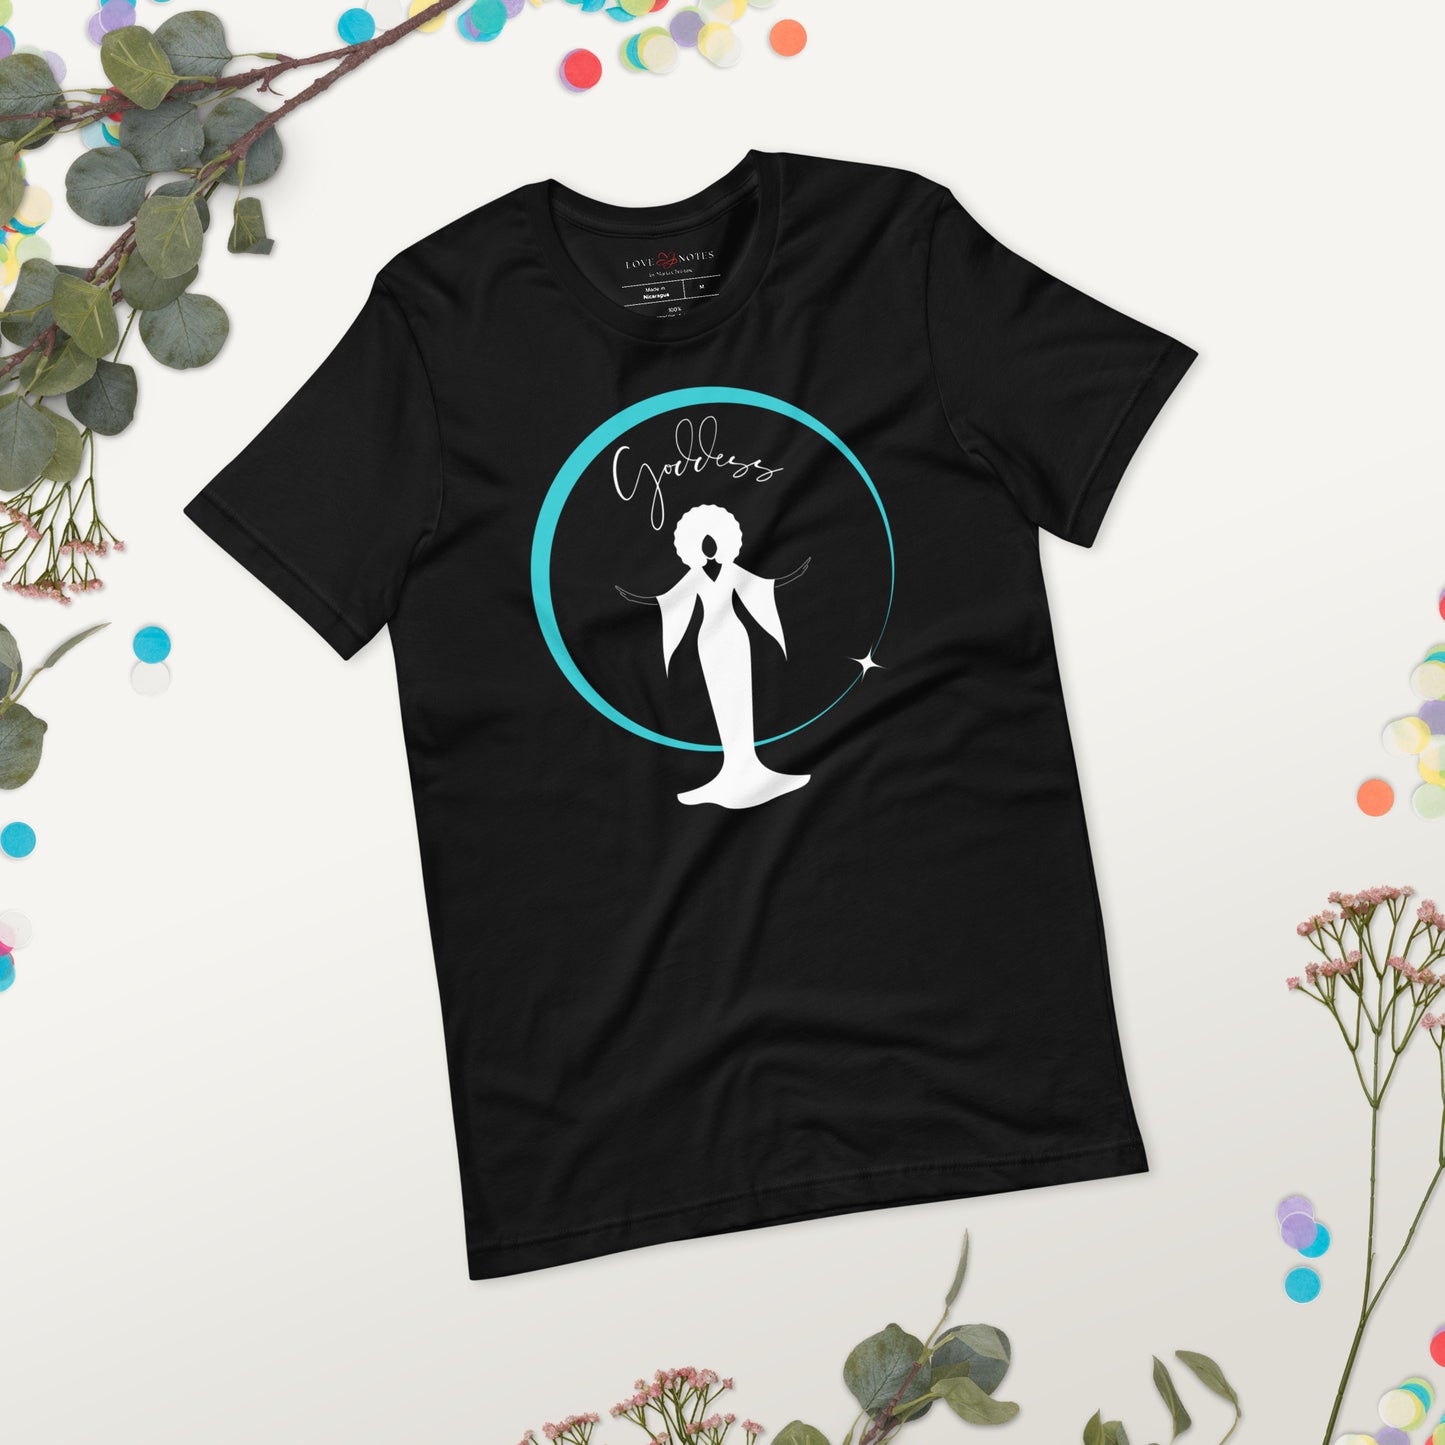 Unisex Tee: Goddess in White Gown (turquoise ring of light)